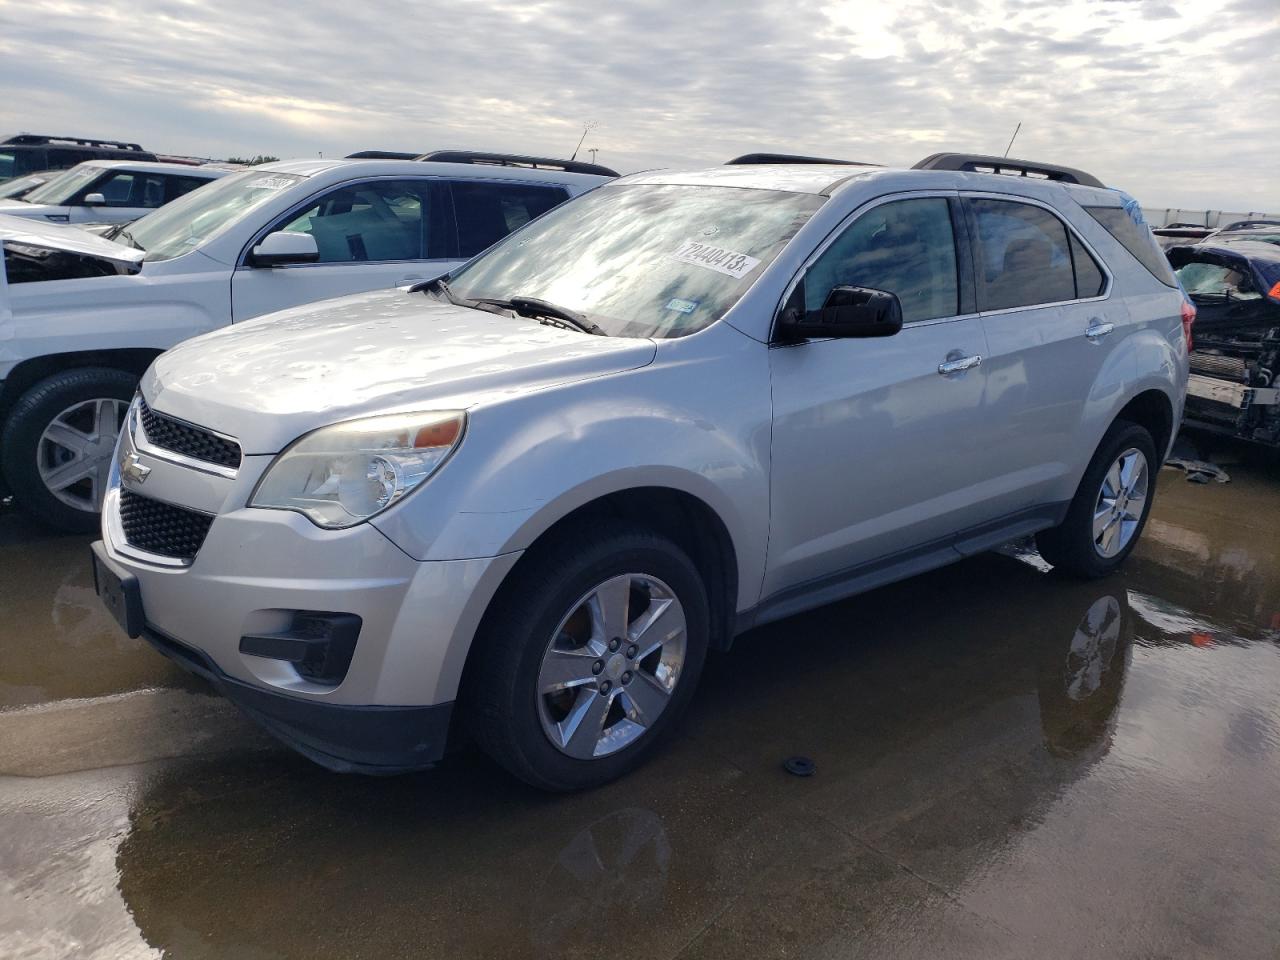 2GNFLBE31F6****** Salvage and Wrecked 2015 Chevrolet Equinox in TX - Wilmer